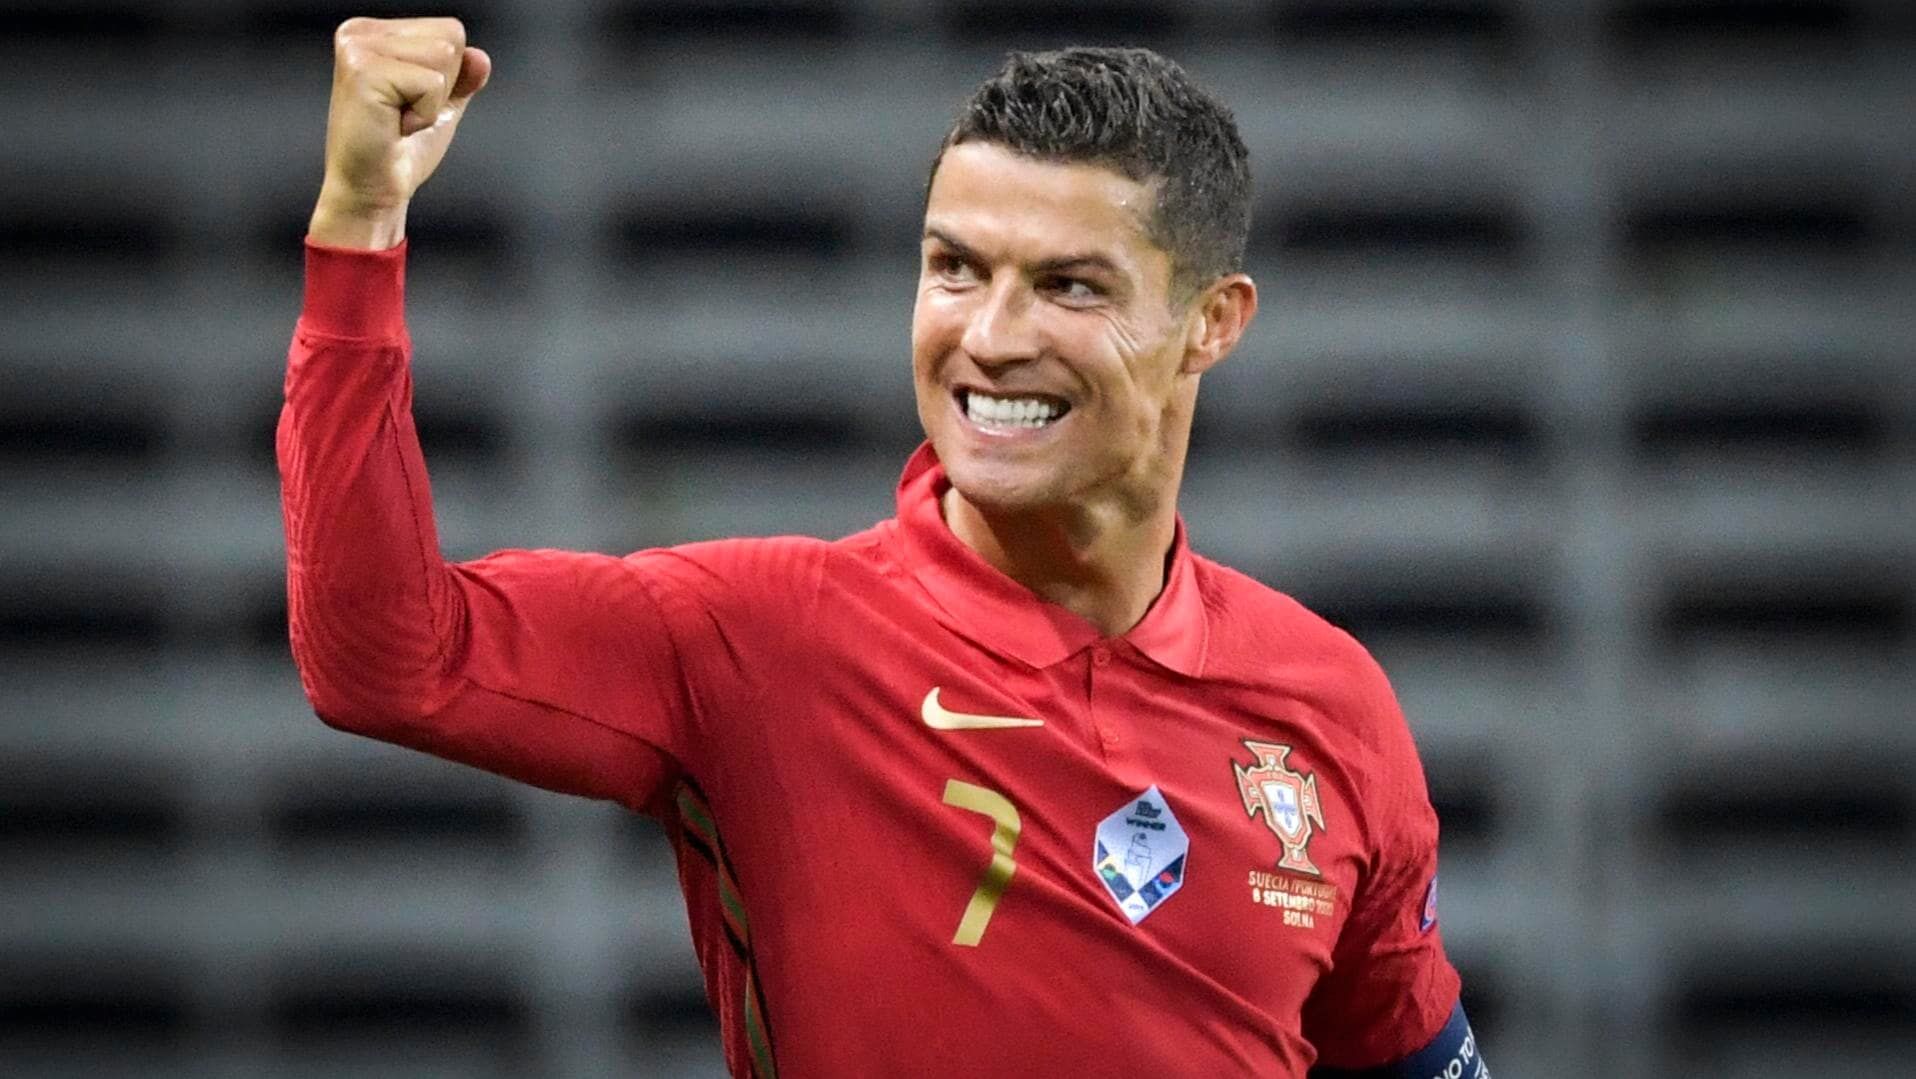 Ronaldo repeats World Cup record by playing for Portugal in fifth World Cup